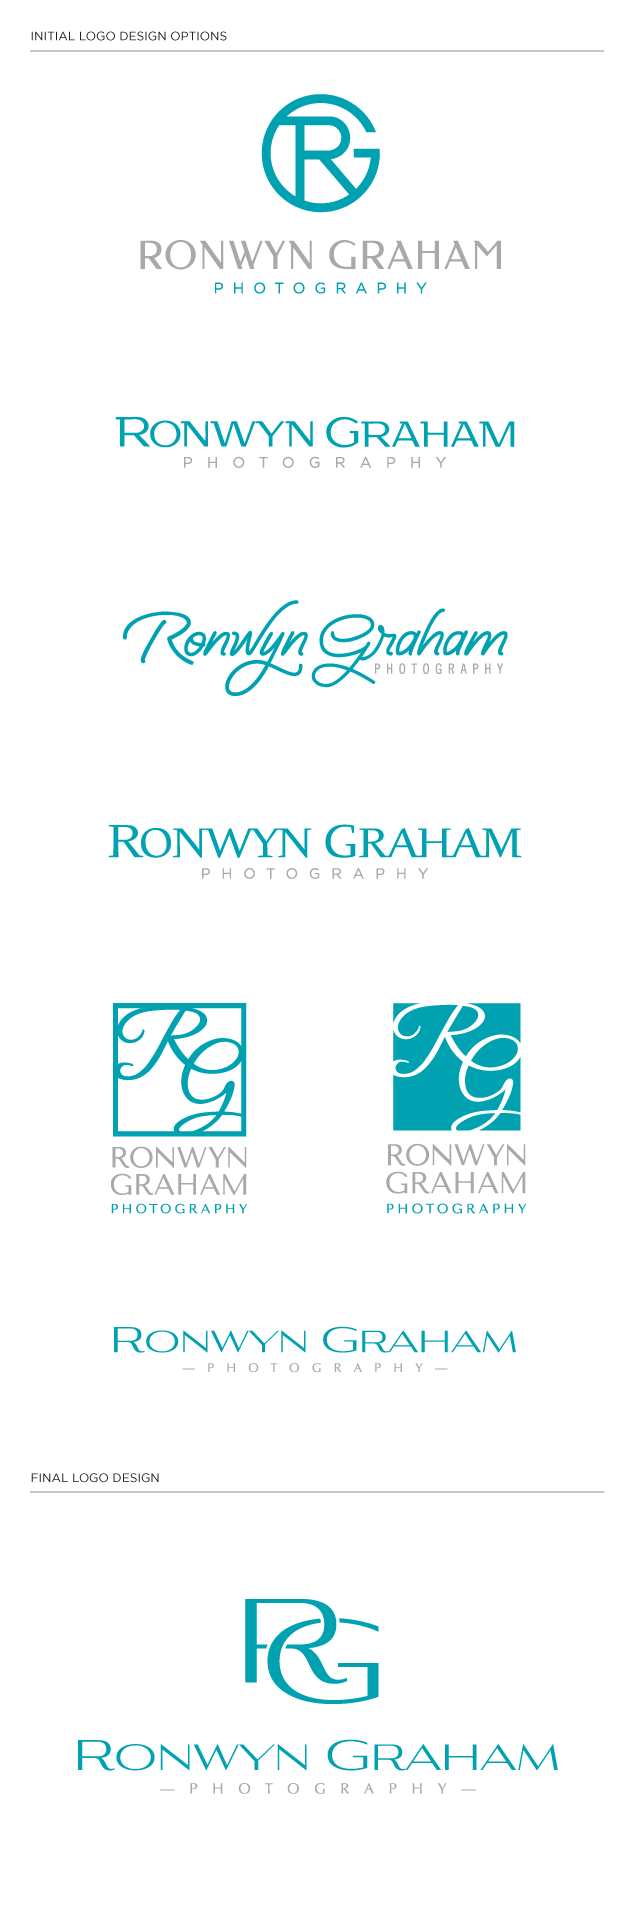 photography logo design for Ronwyn Graham photography